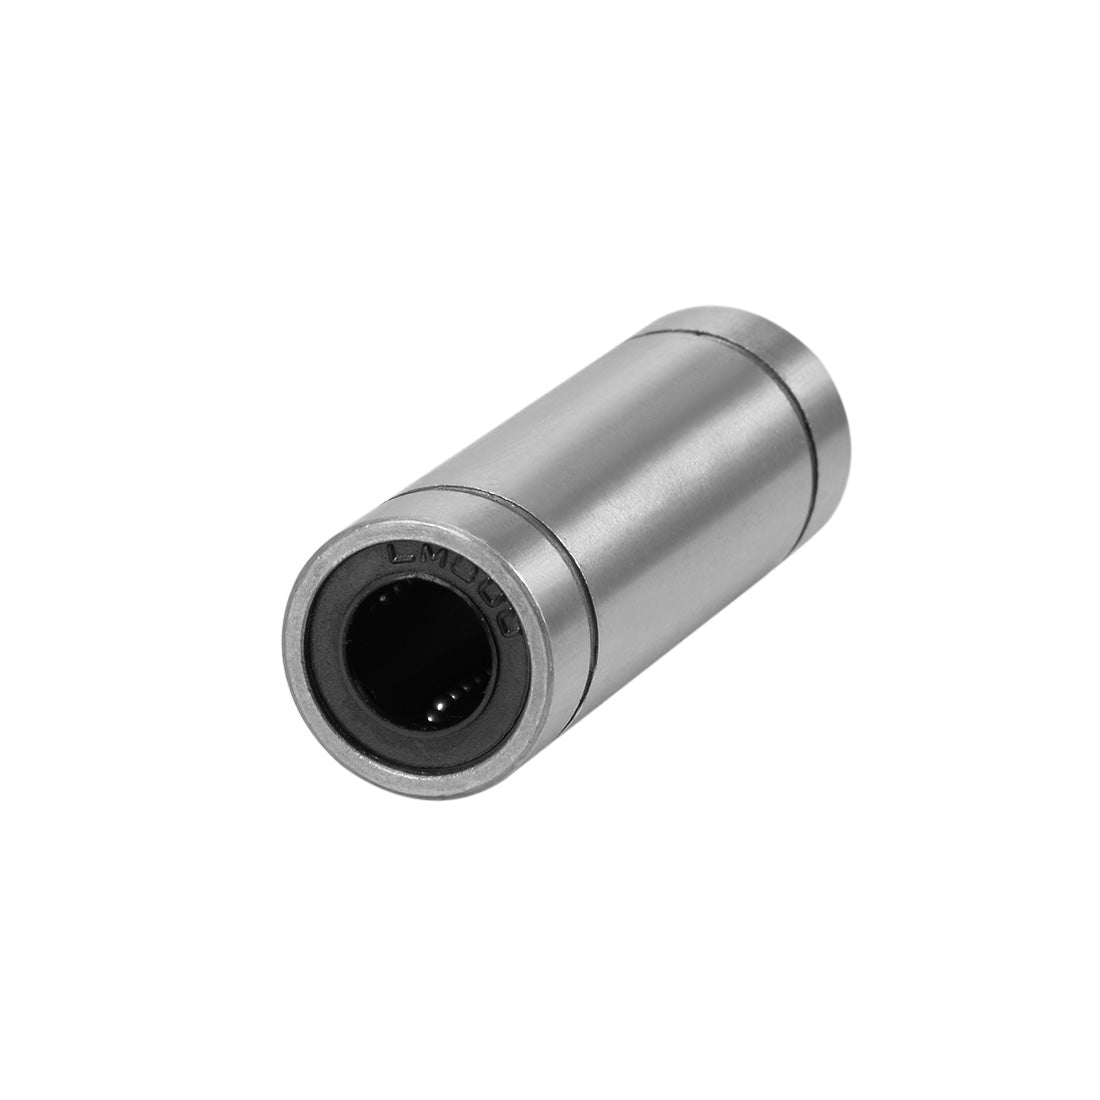 uxcell Uxcell Linear Motion Ball Bearings Extra Long for 3D Printers